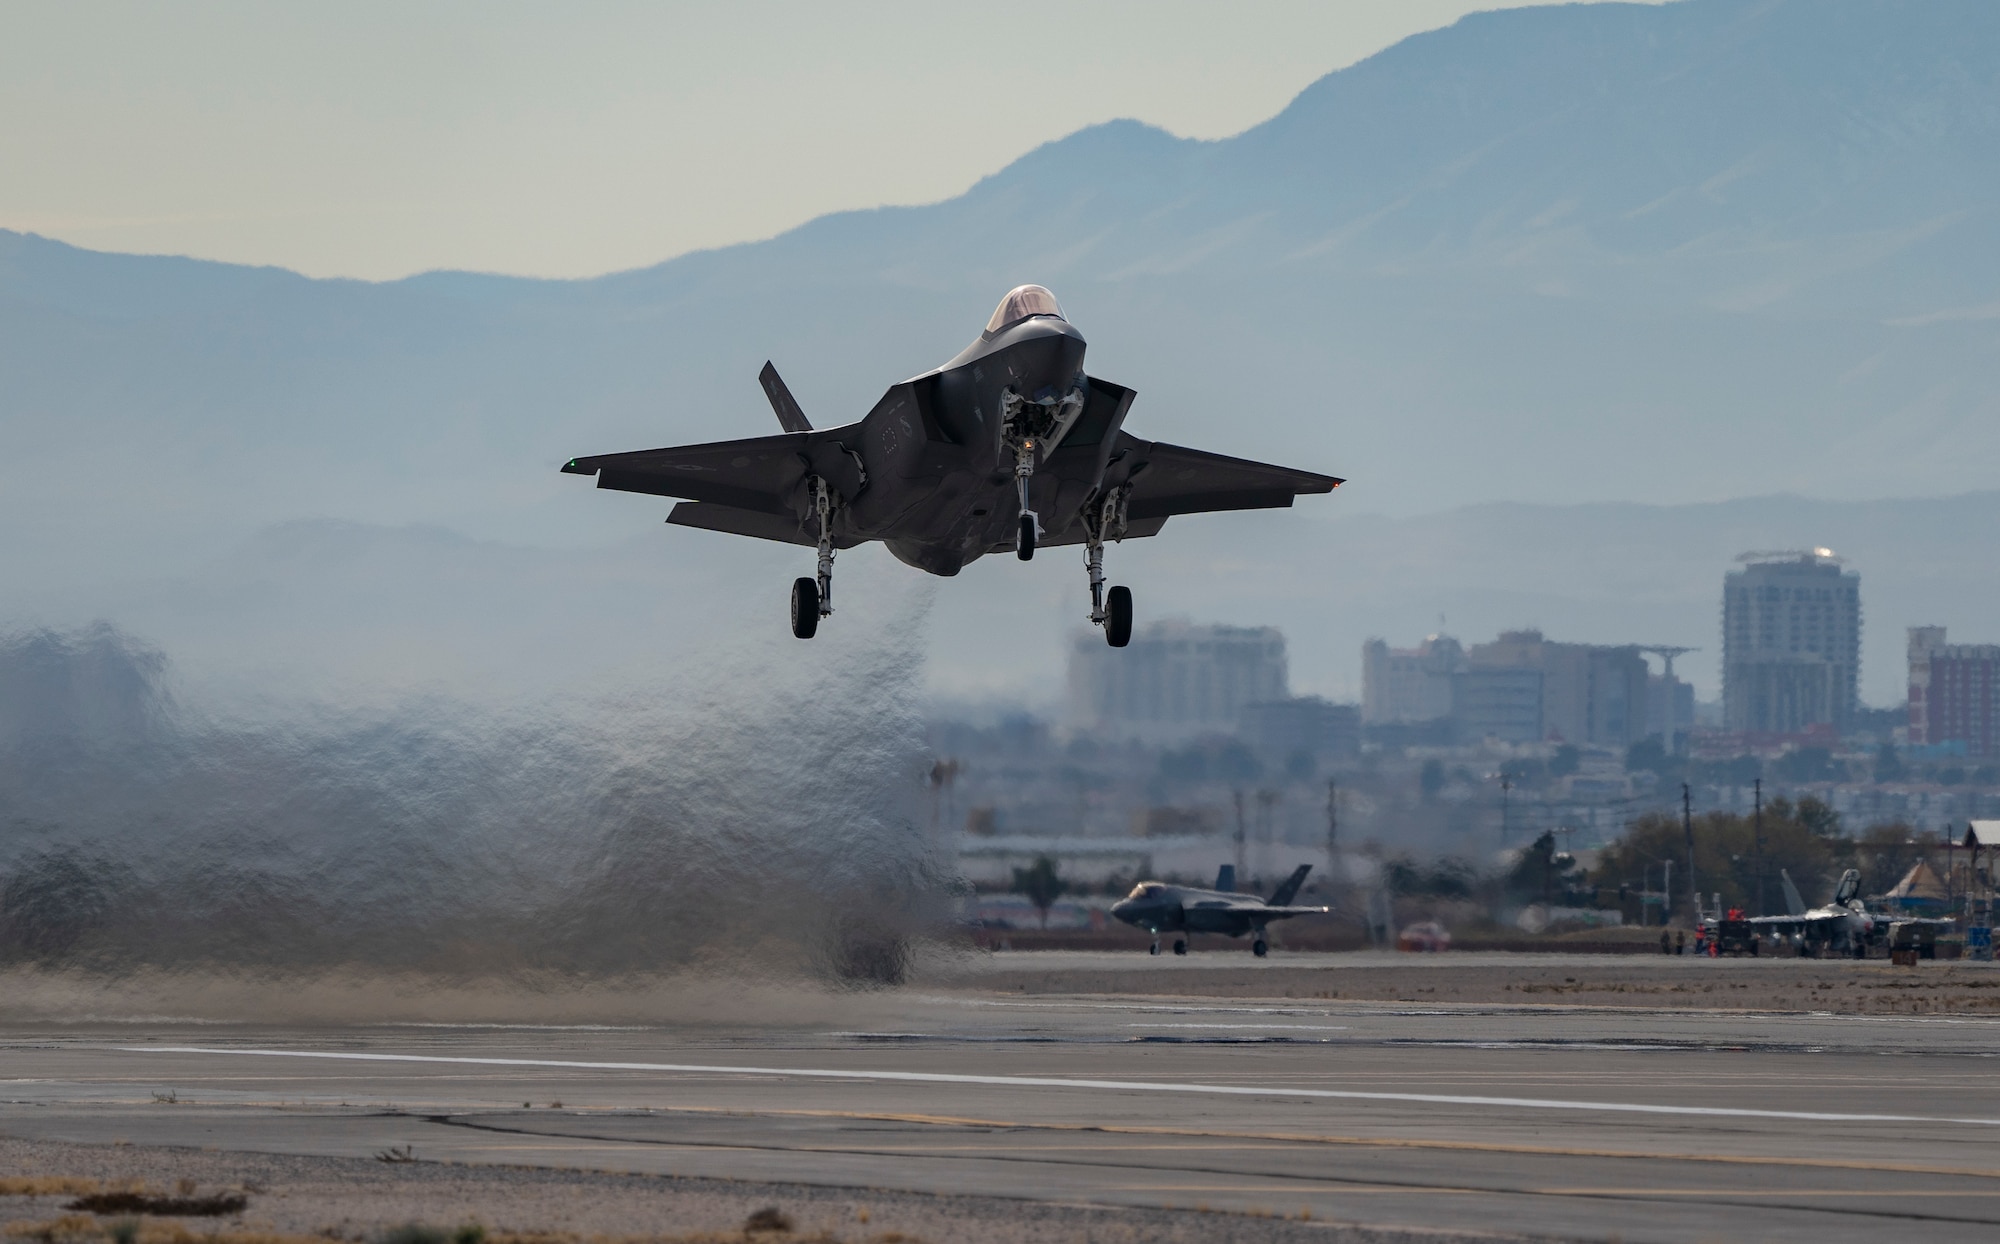 An F-35A Lightning II fighter jet assigned to the 421st Fighter Squadron, Hill Air Force Base, Utah, takes off during Red Flag 20-1 at Nellis AFB, Nevada, Feb. 5, 2020. The F-35A is designed to provide the pilot with unsurpassed situational awareness, positive target identification and precision strike capabilities in all weather conditions. (U.S. Air Force photo by William Lewis)